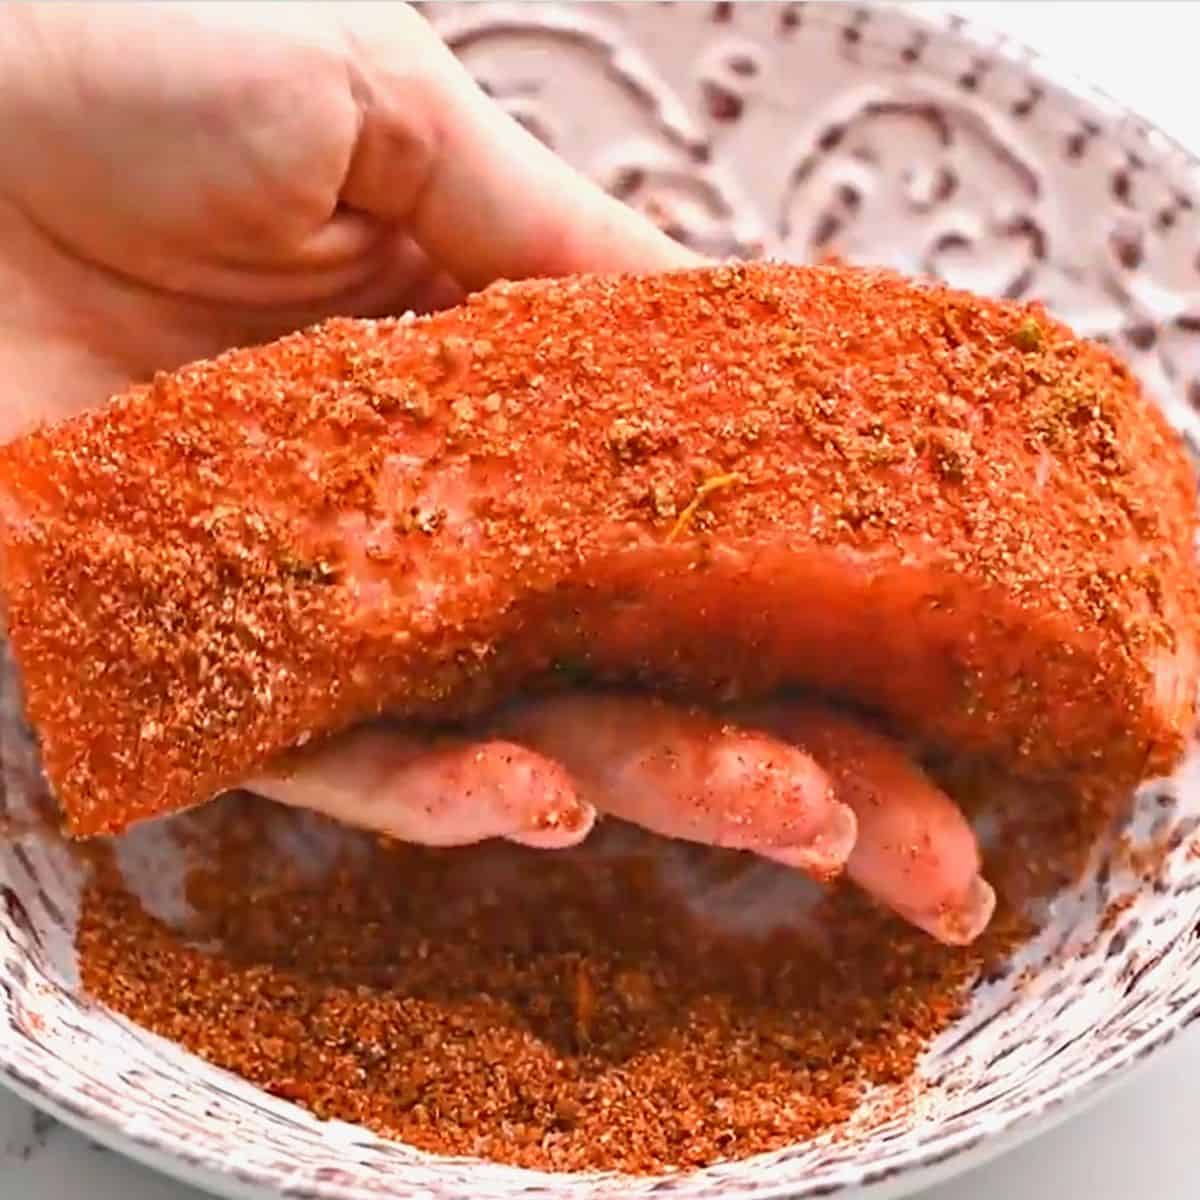 Salmon fillets being coated in spice rub. 